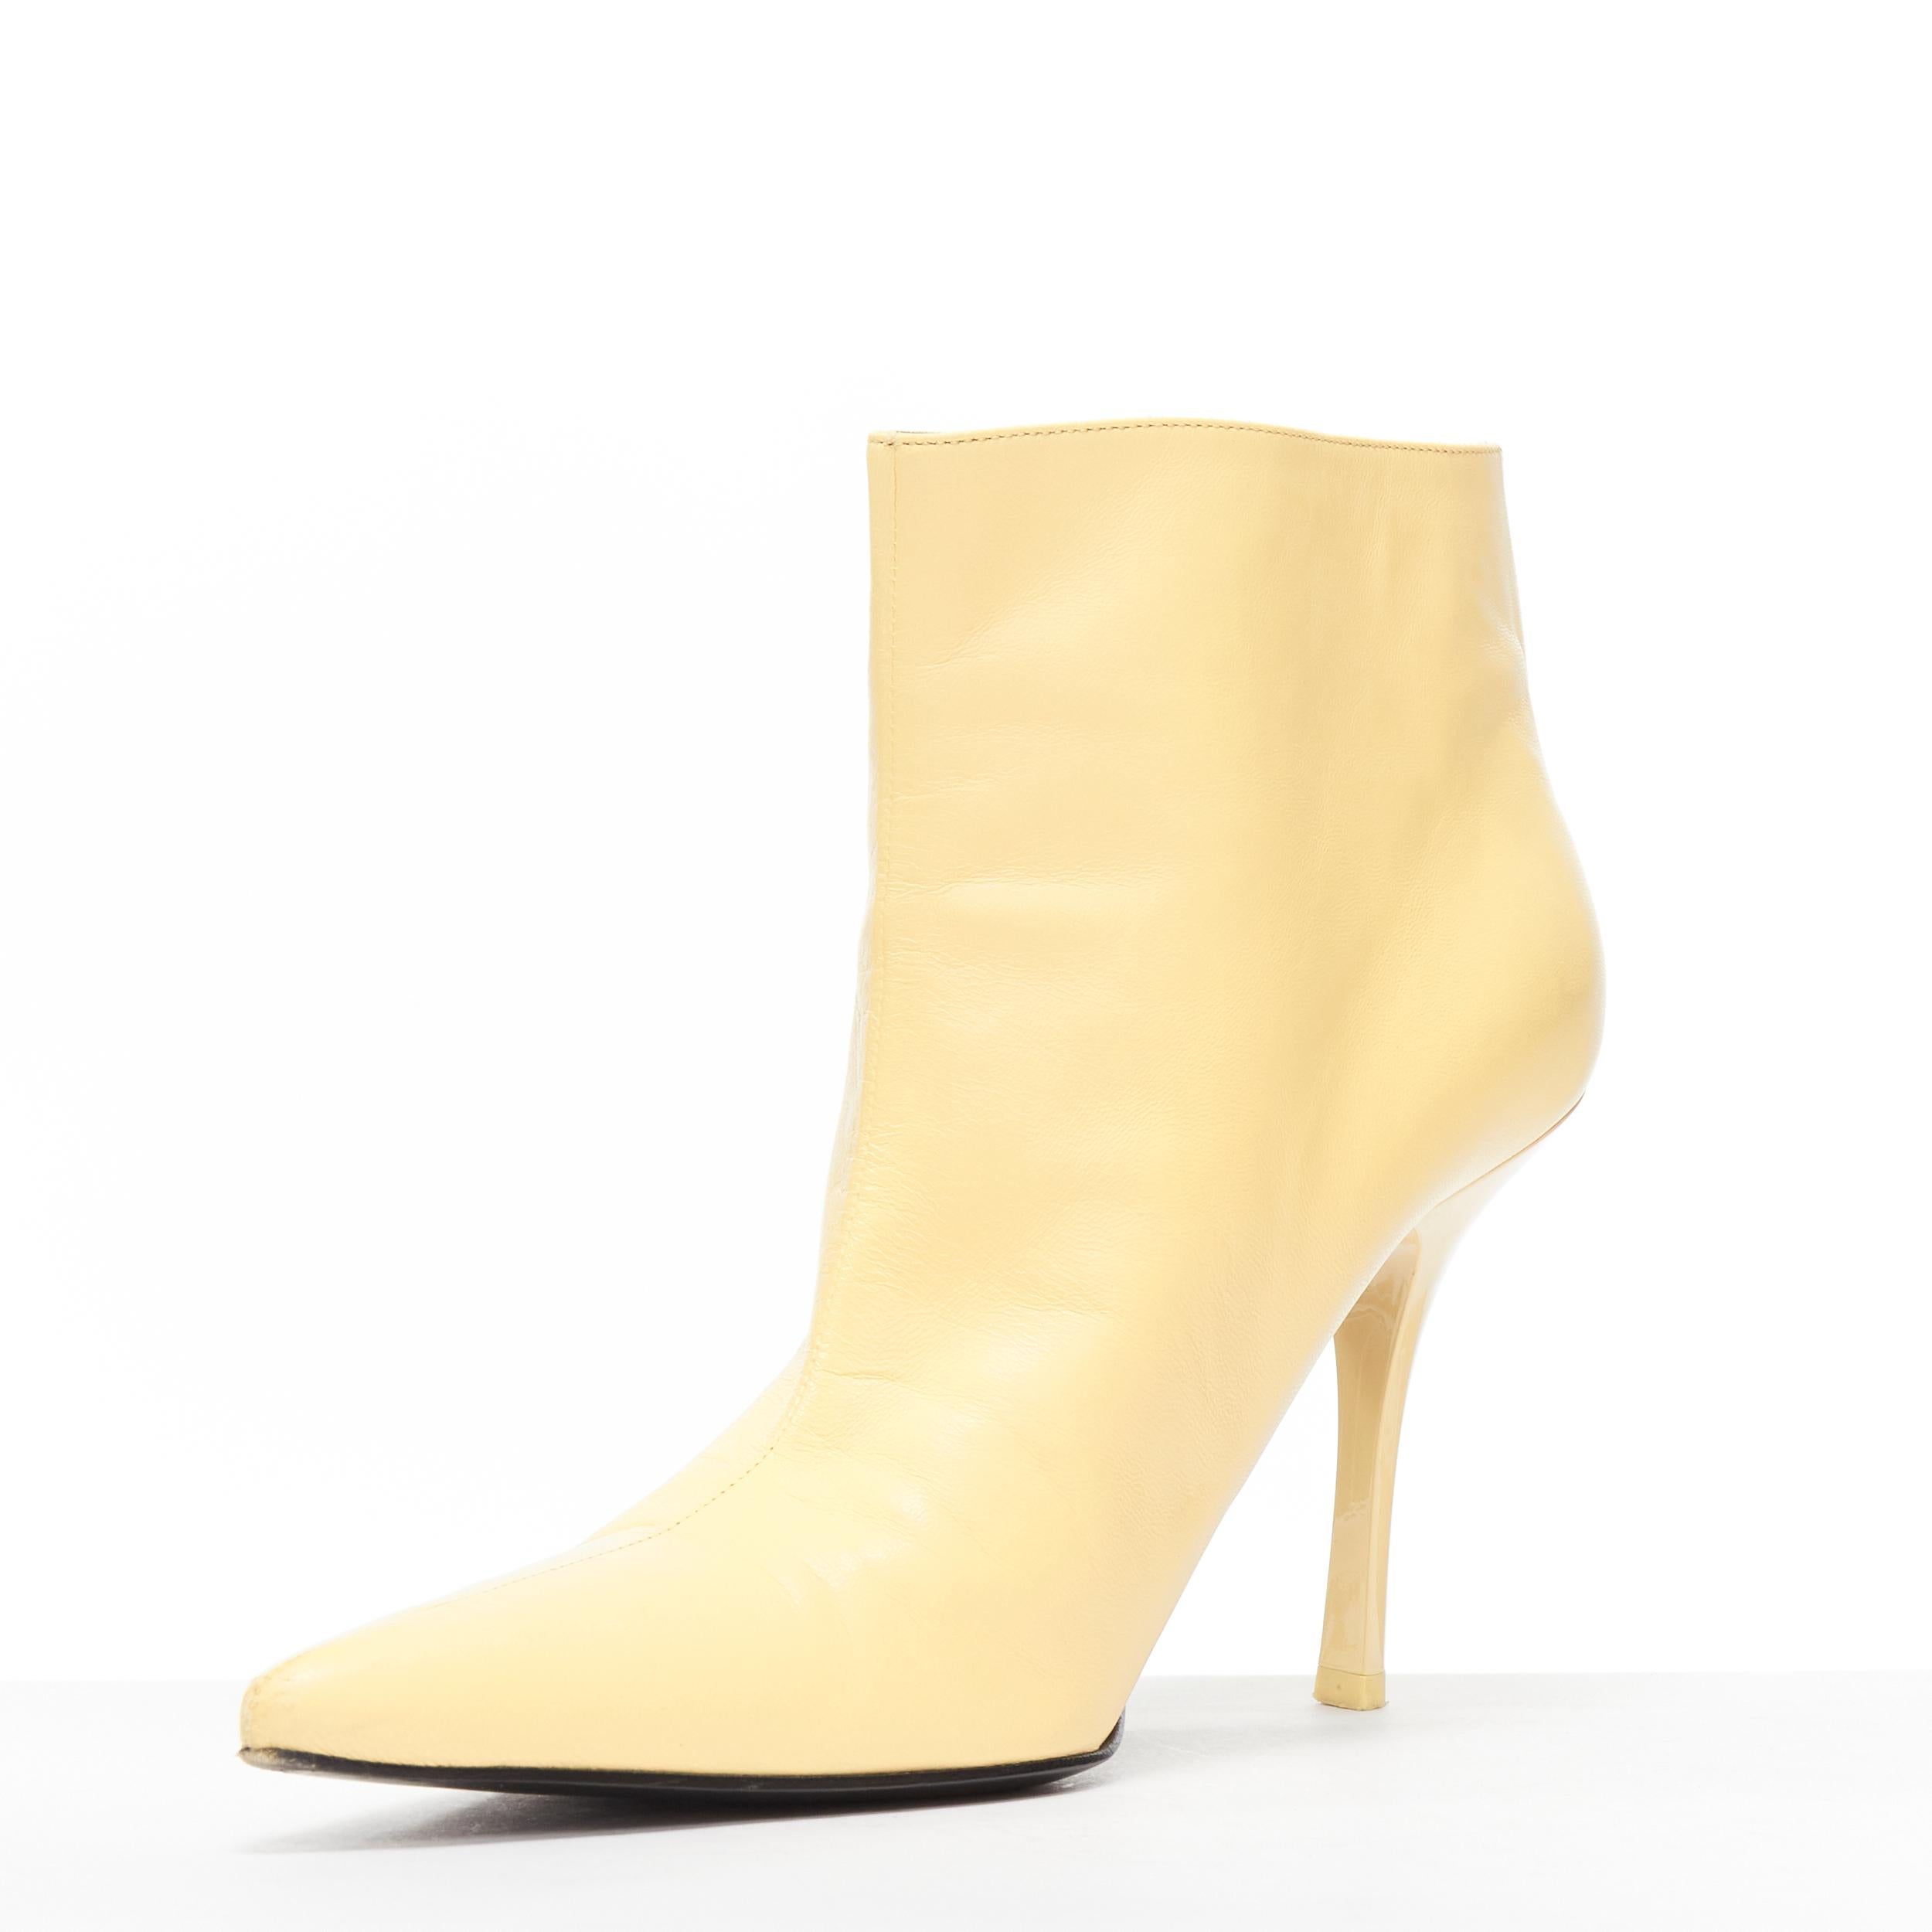 Orange OLD CELINE Phoebe Philo nude leather pointed toe high heel ankle boots EU38 For Sale